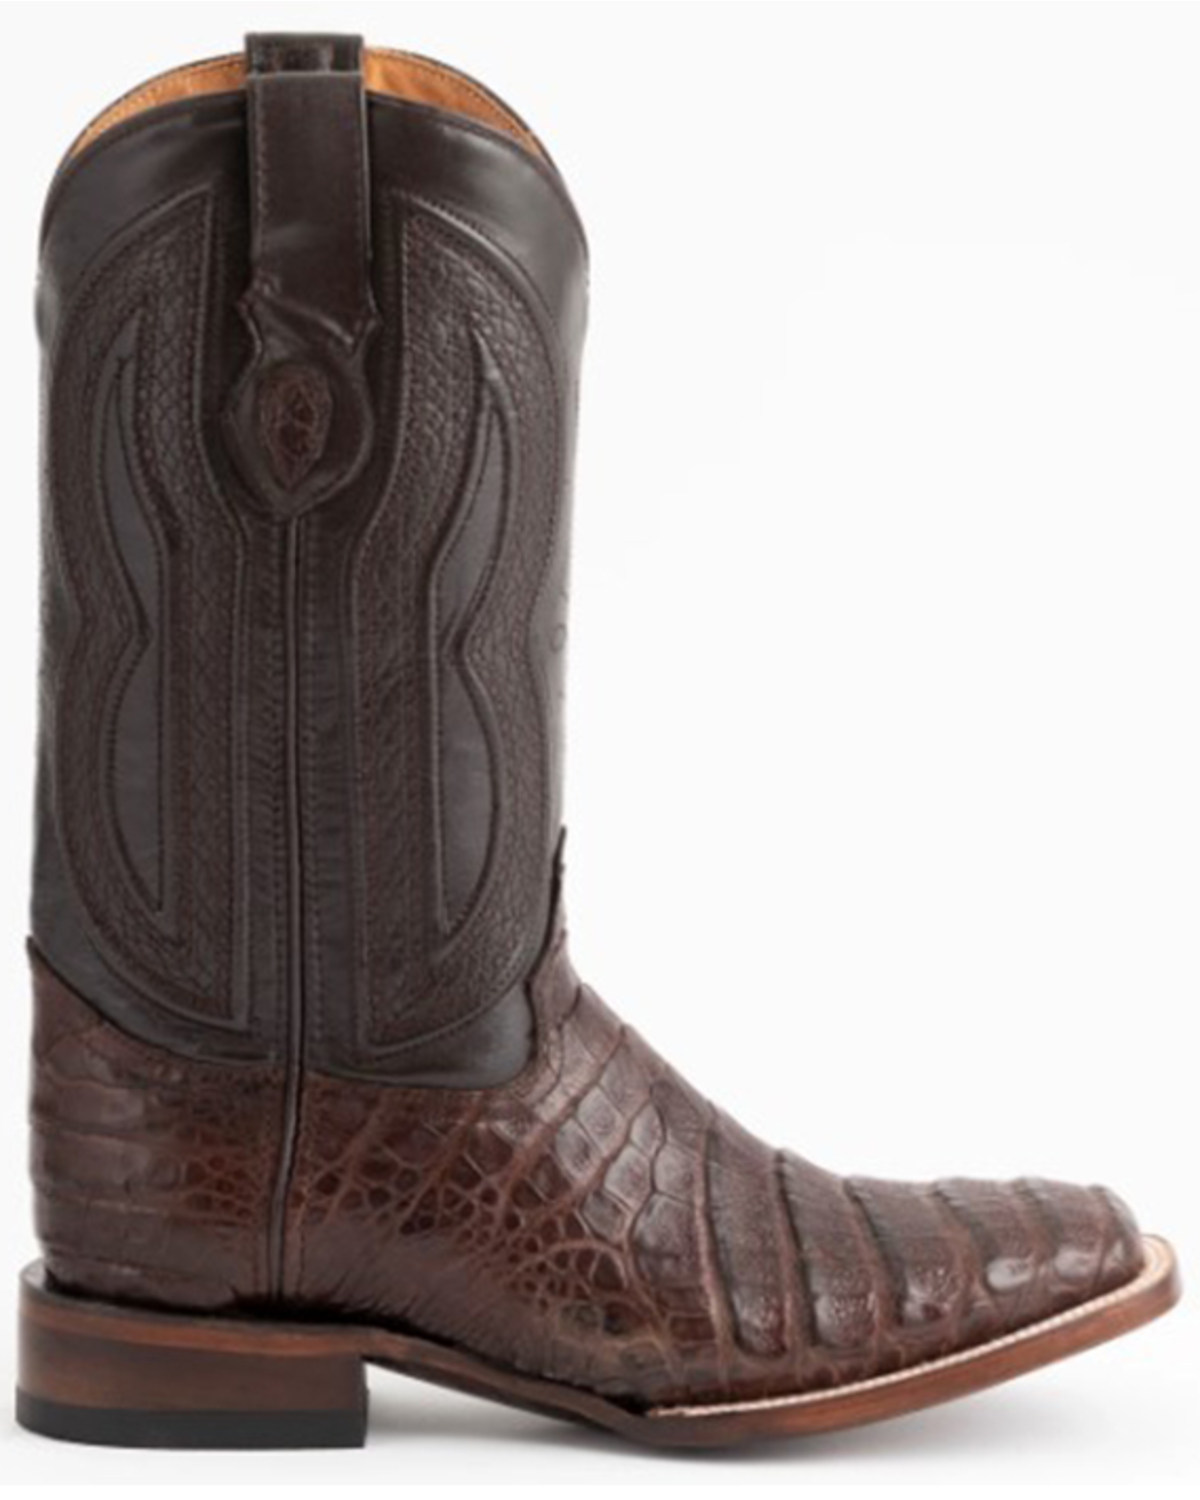 Ferrini  Mens Belly Caiman Chocolate Square Toe   Western Cowboy Boots   Mid Calf - image 2 of 7